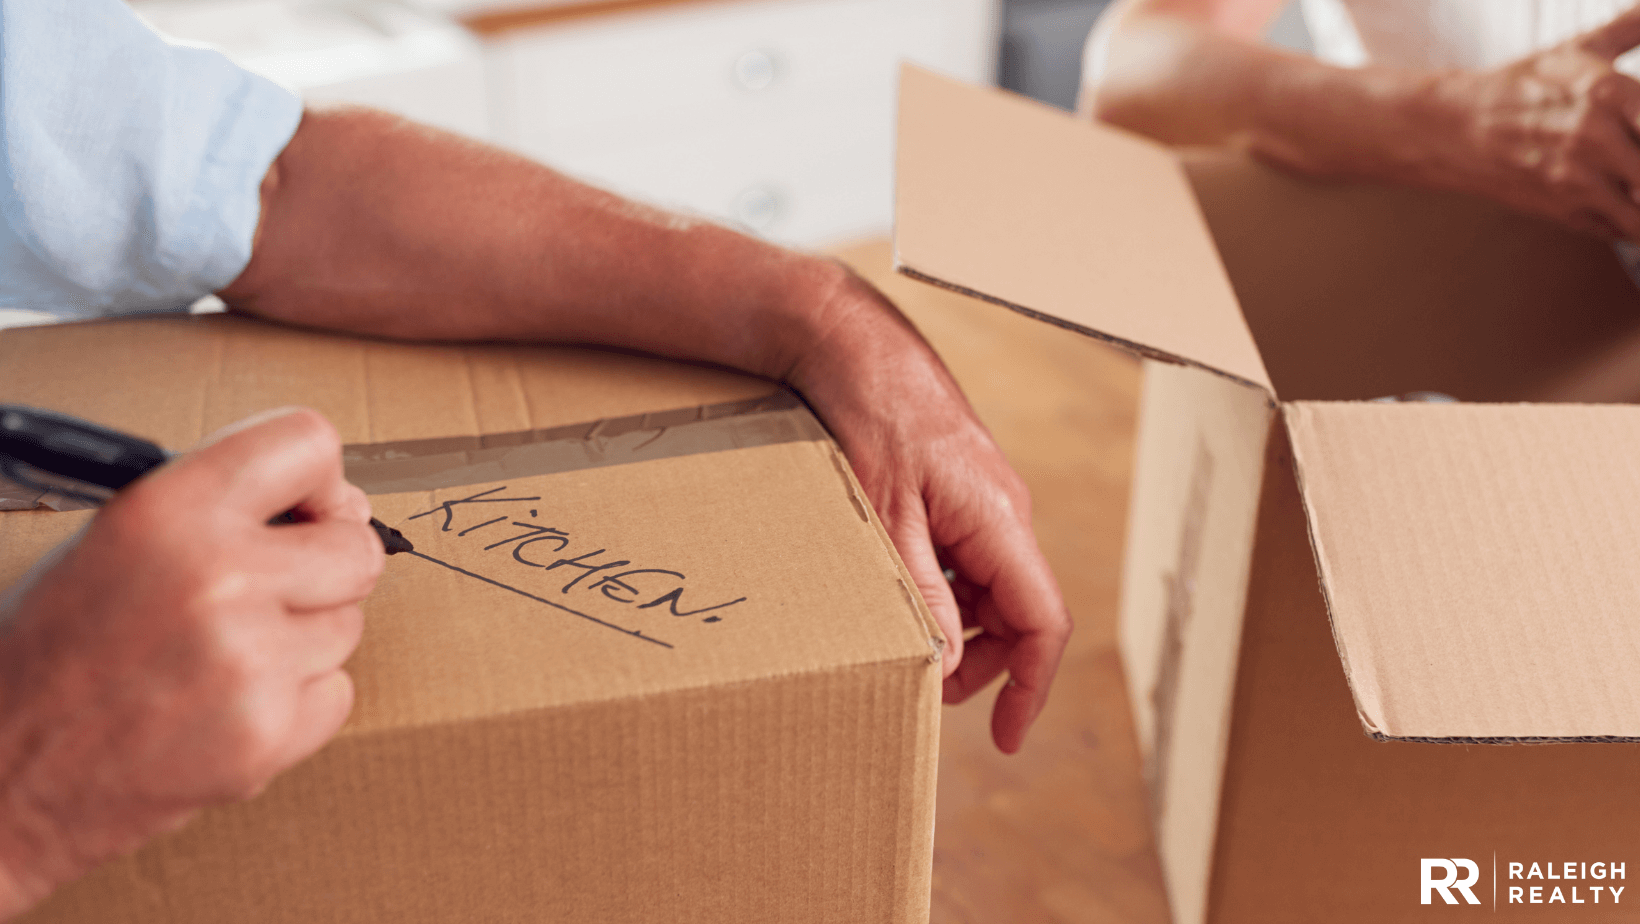 Labeling boxes is a great way to be efficient with your organization